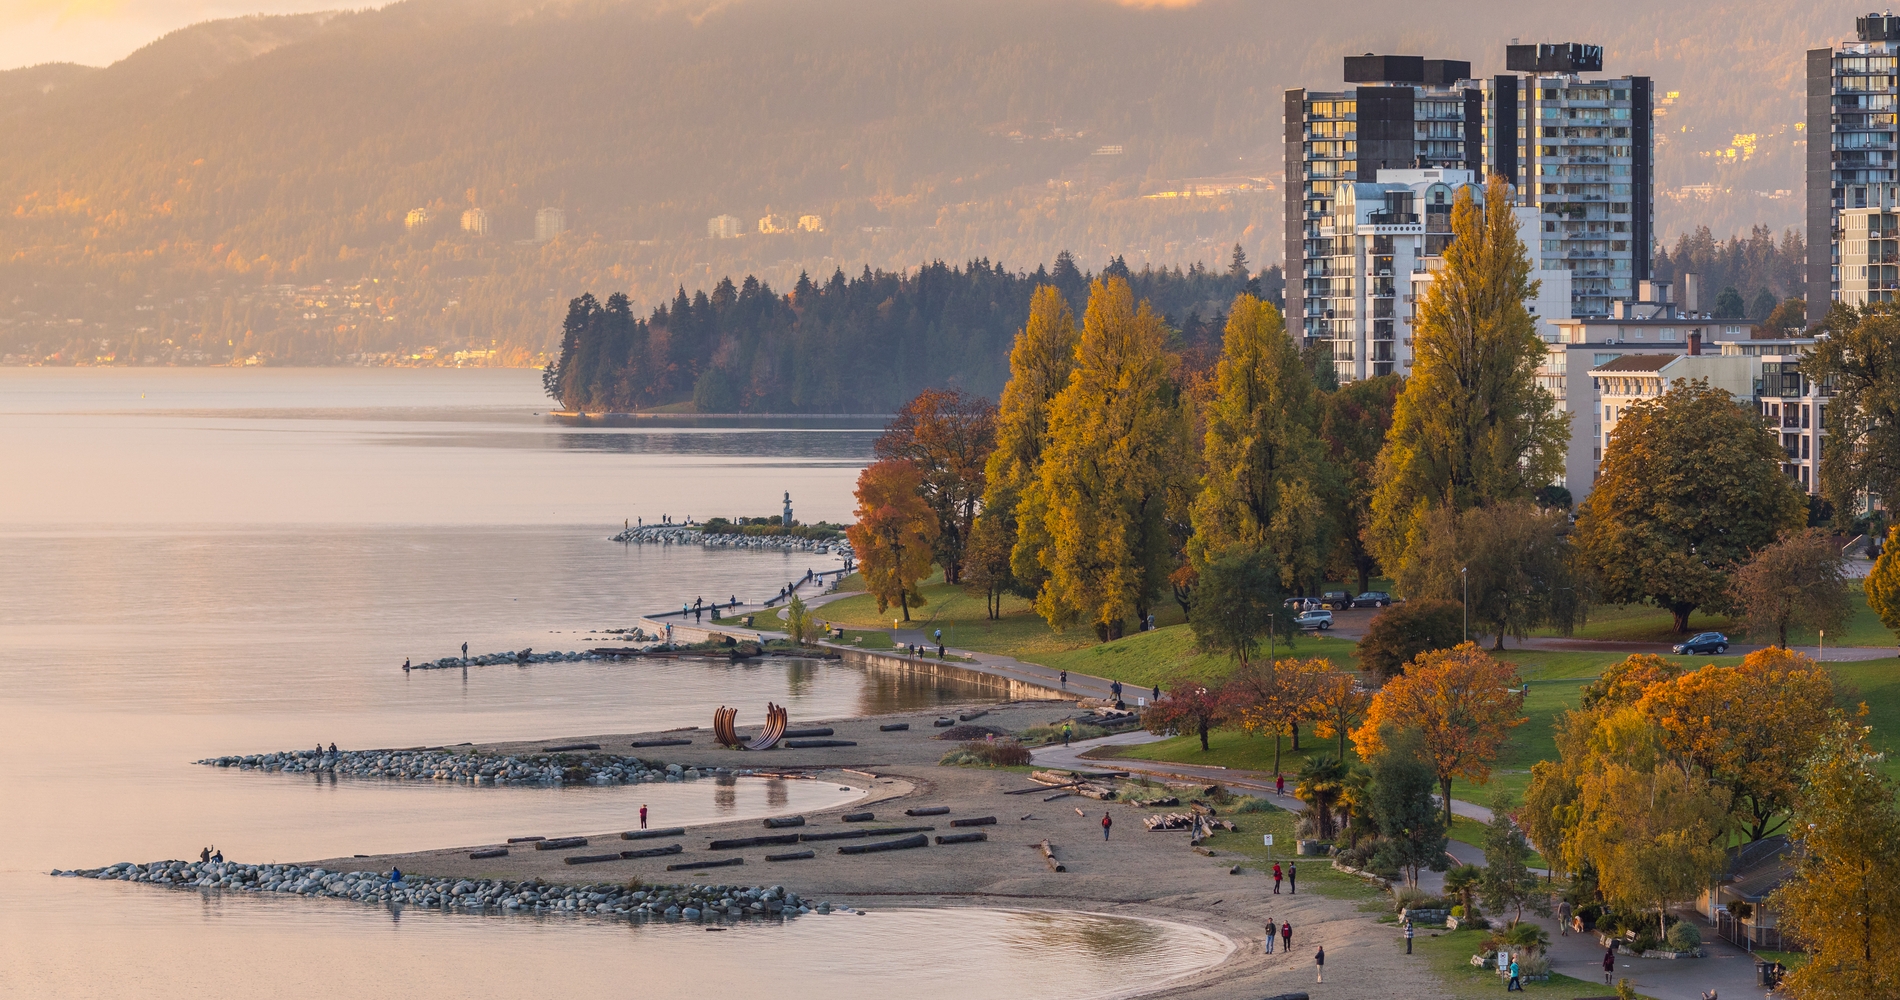 Sunset Beach in the West End | ourism Vancouver/Nelson MouellicTourism Vancouver / Vision Event Photography Inc.